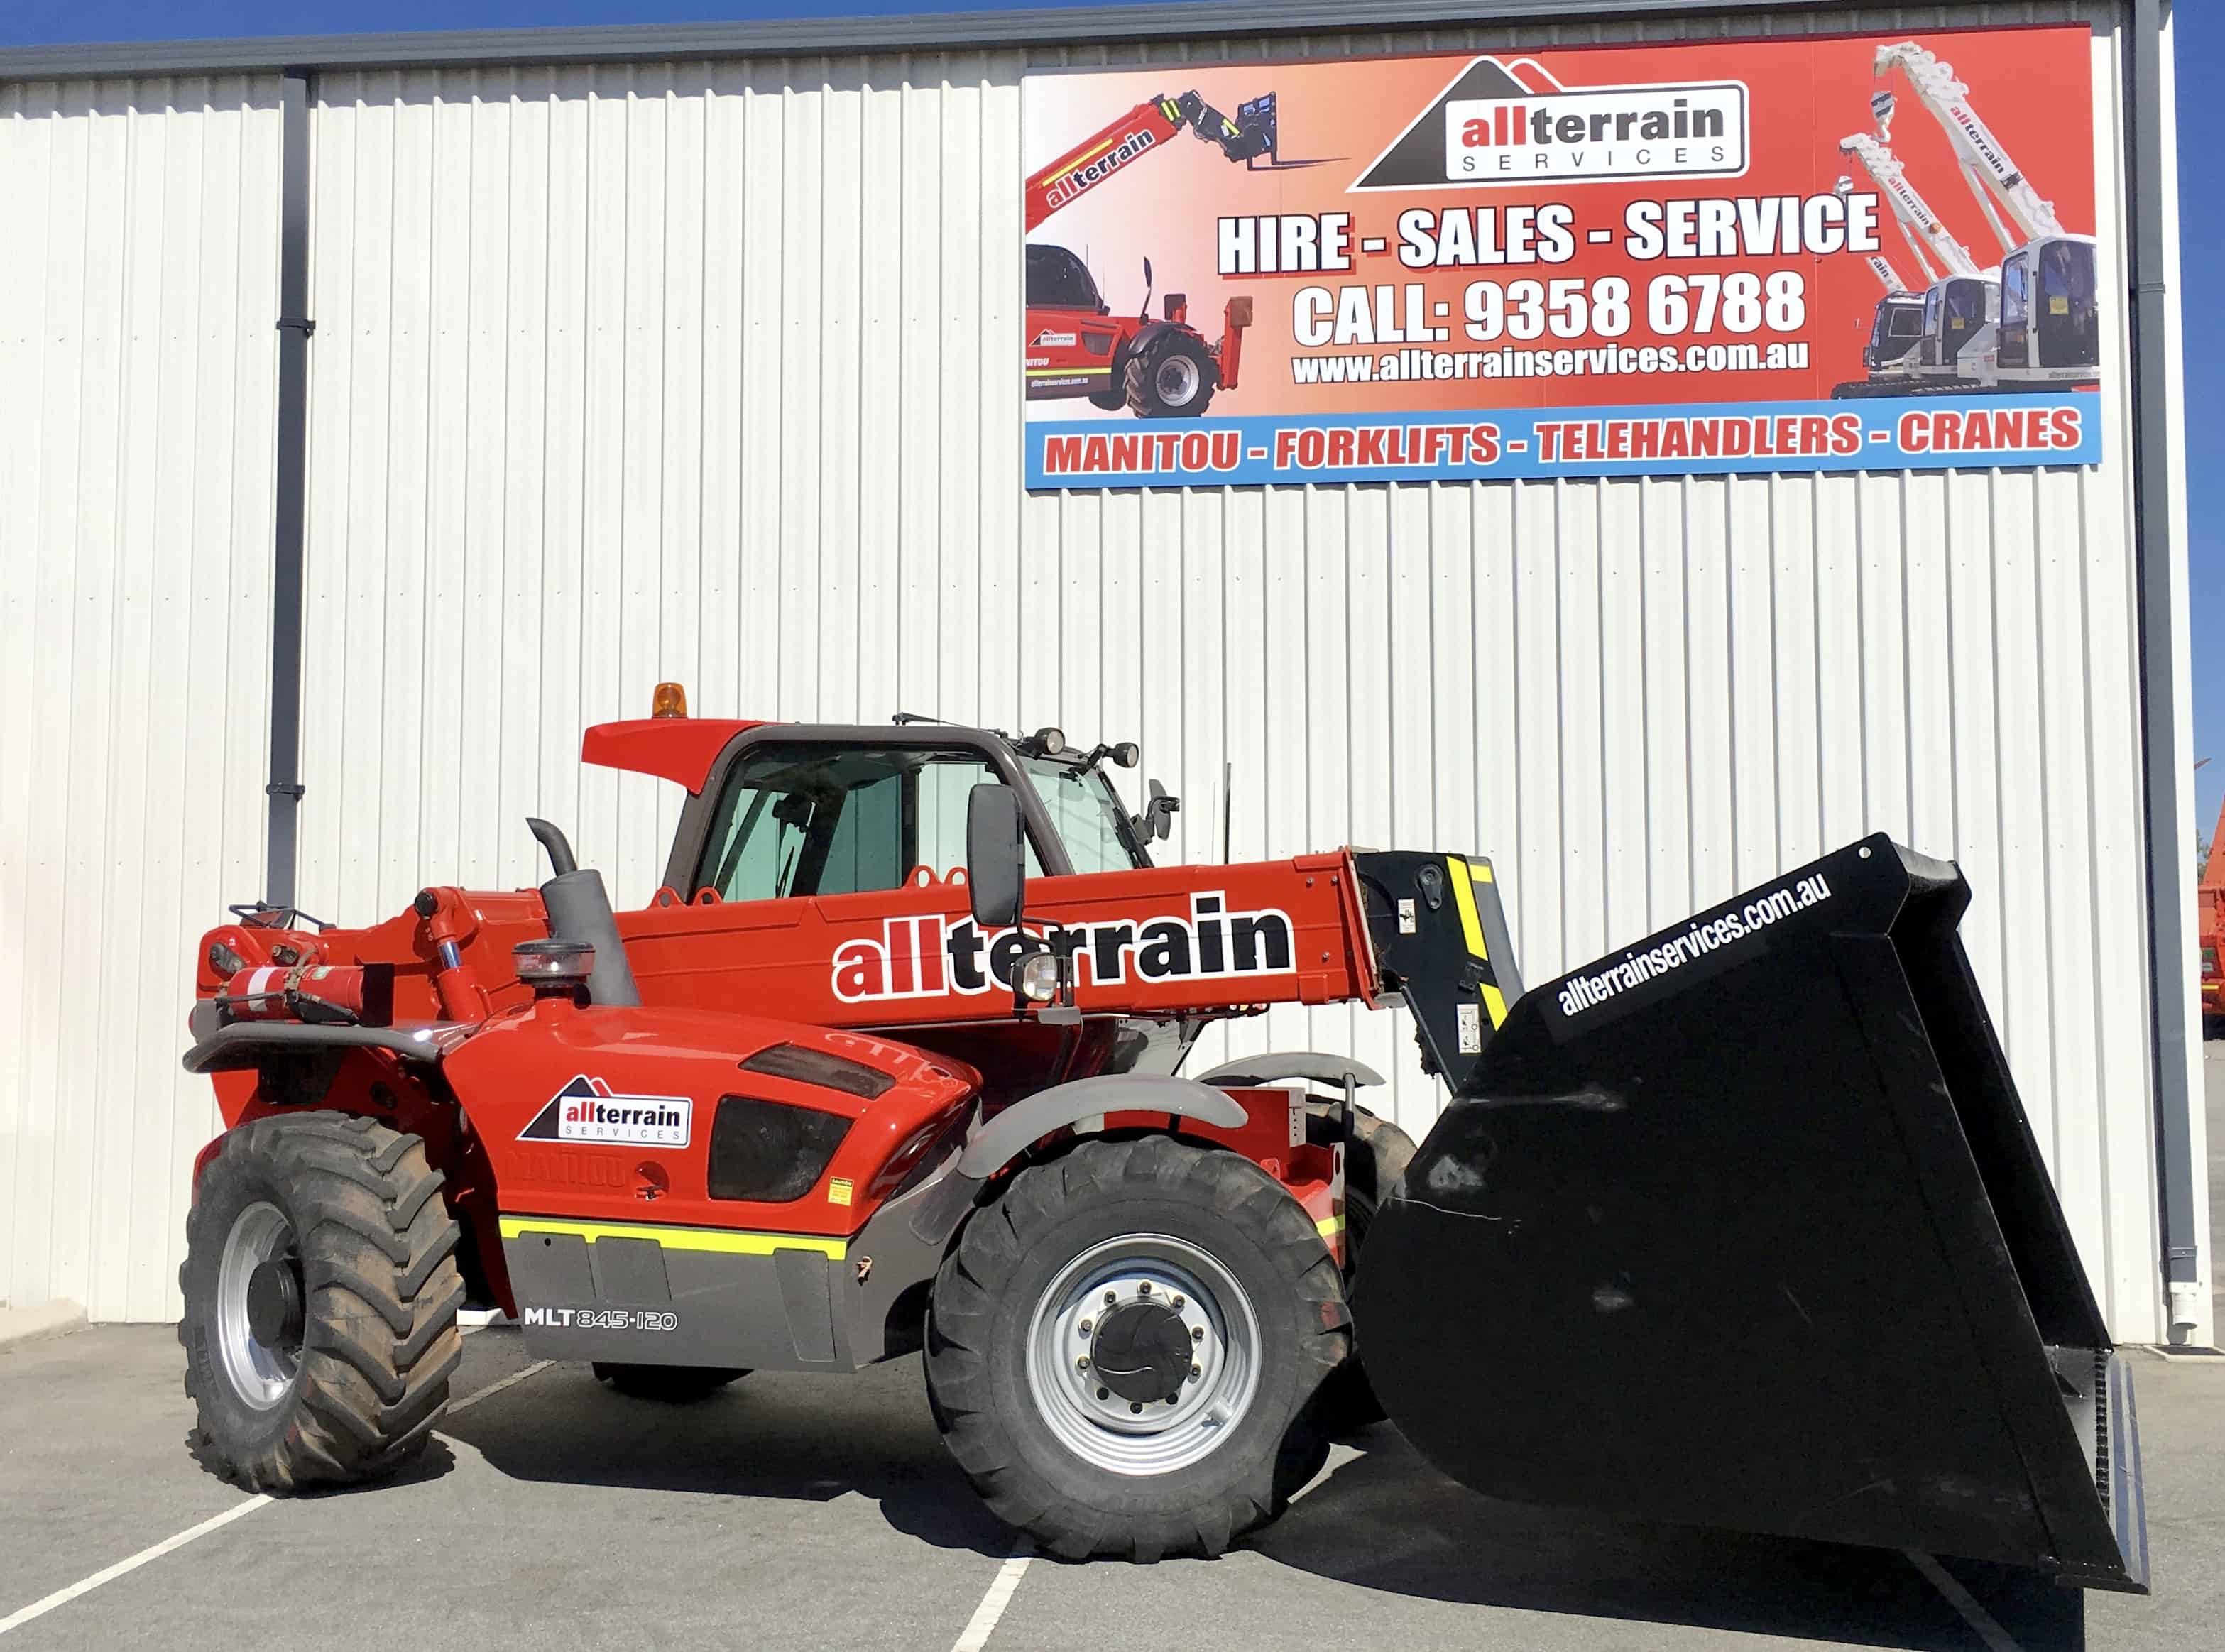 all-terrain-services-second-hand-forklift-for-sale-full-view-outside